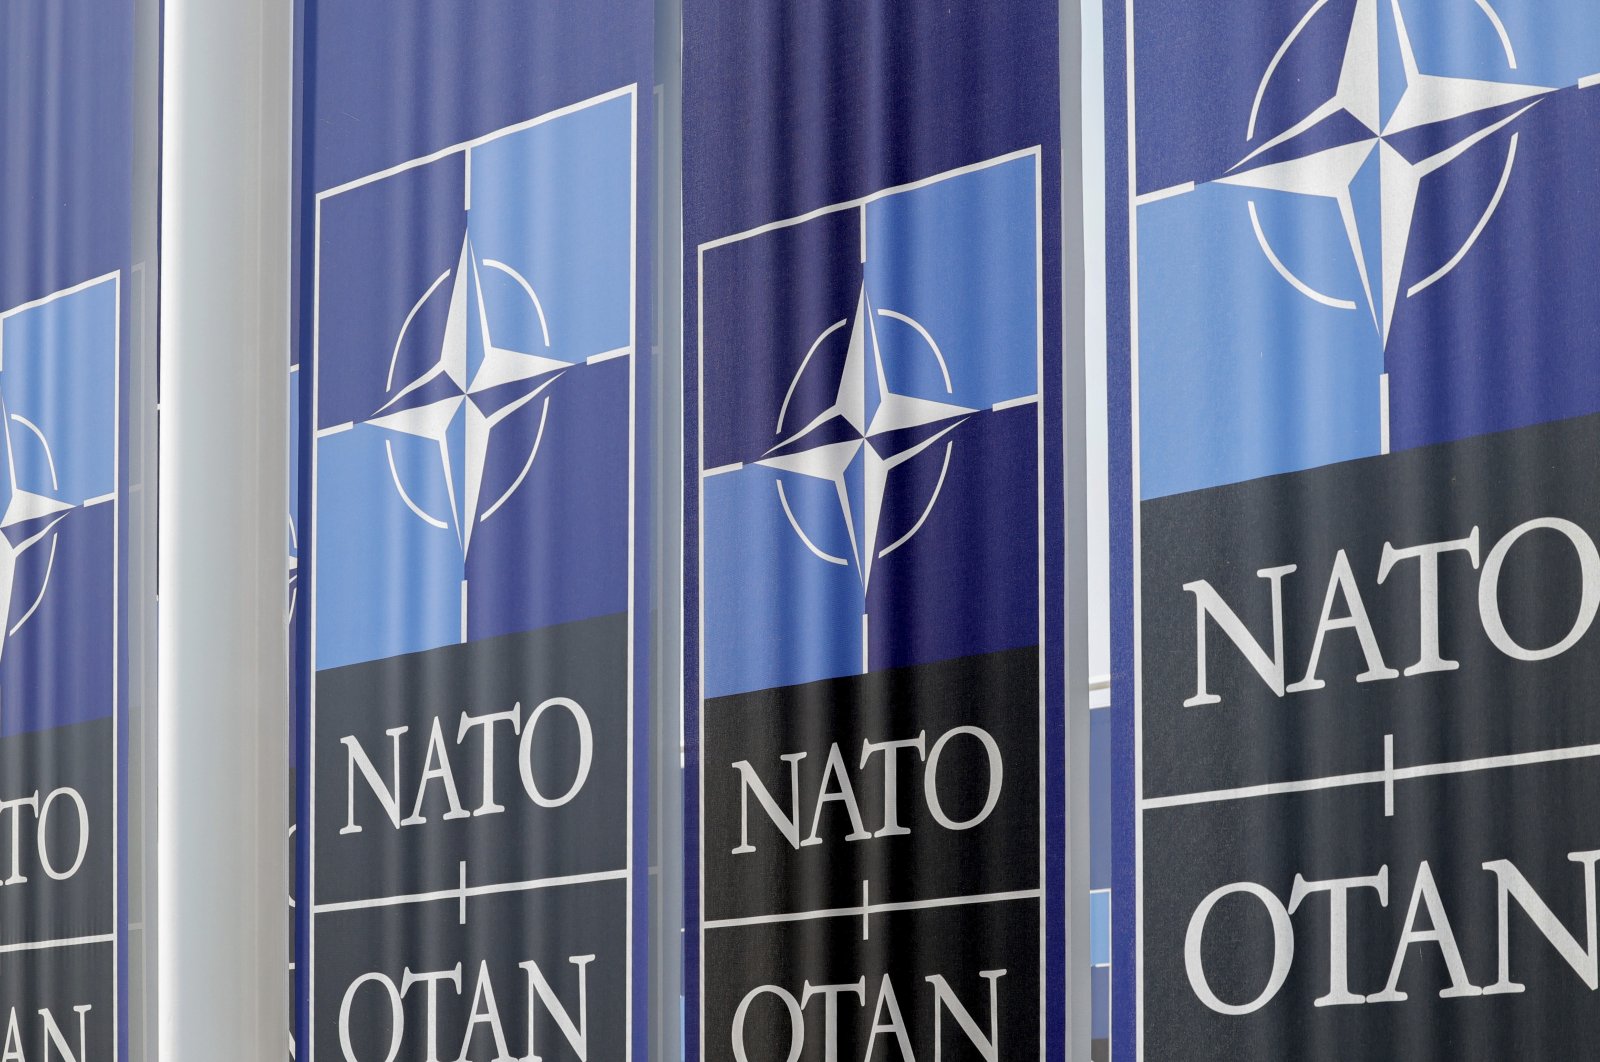 Cloth banners flap in the wind outside NATO headquarters in Brussels, Wednesday, June 15, 2022. (AP Photo)